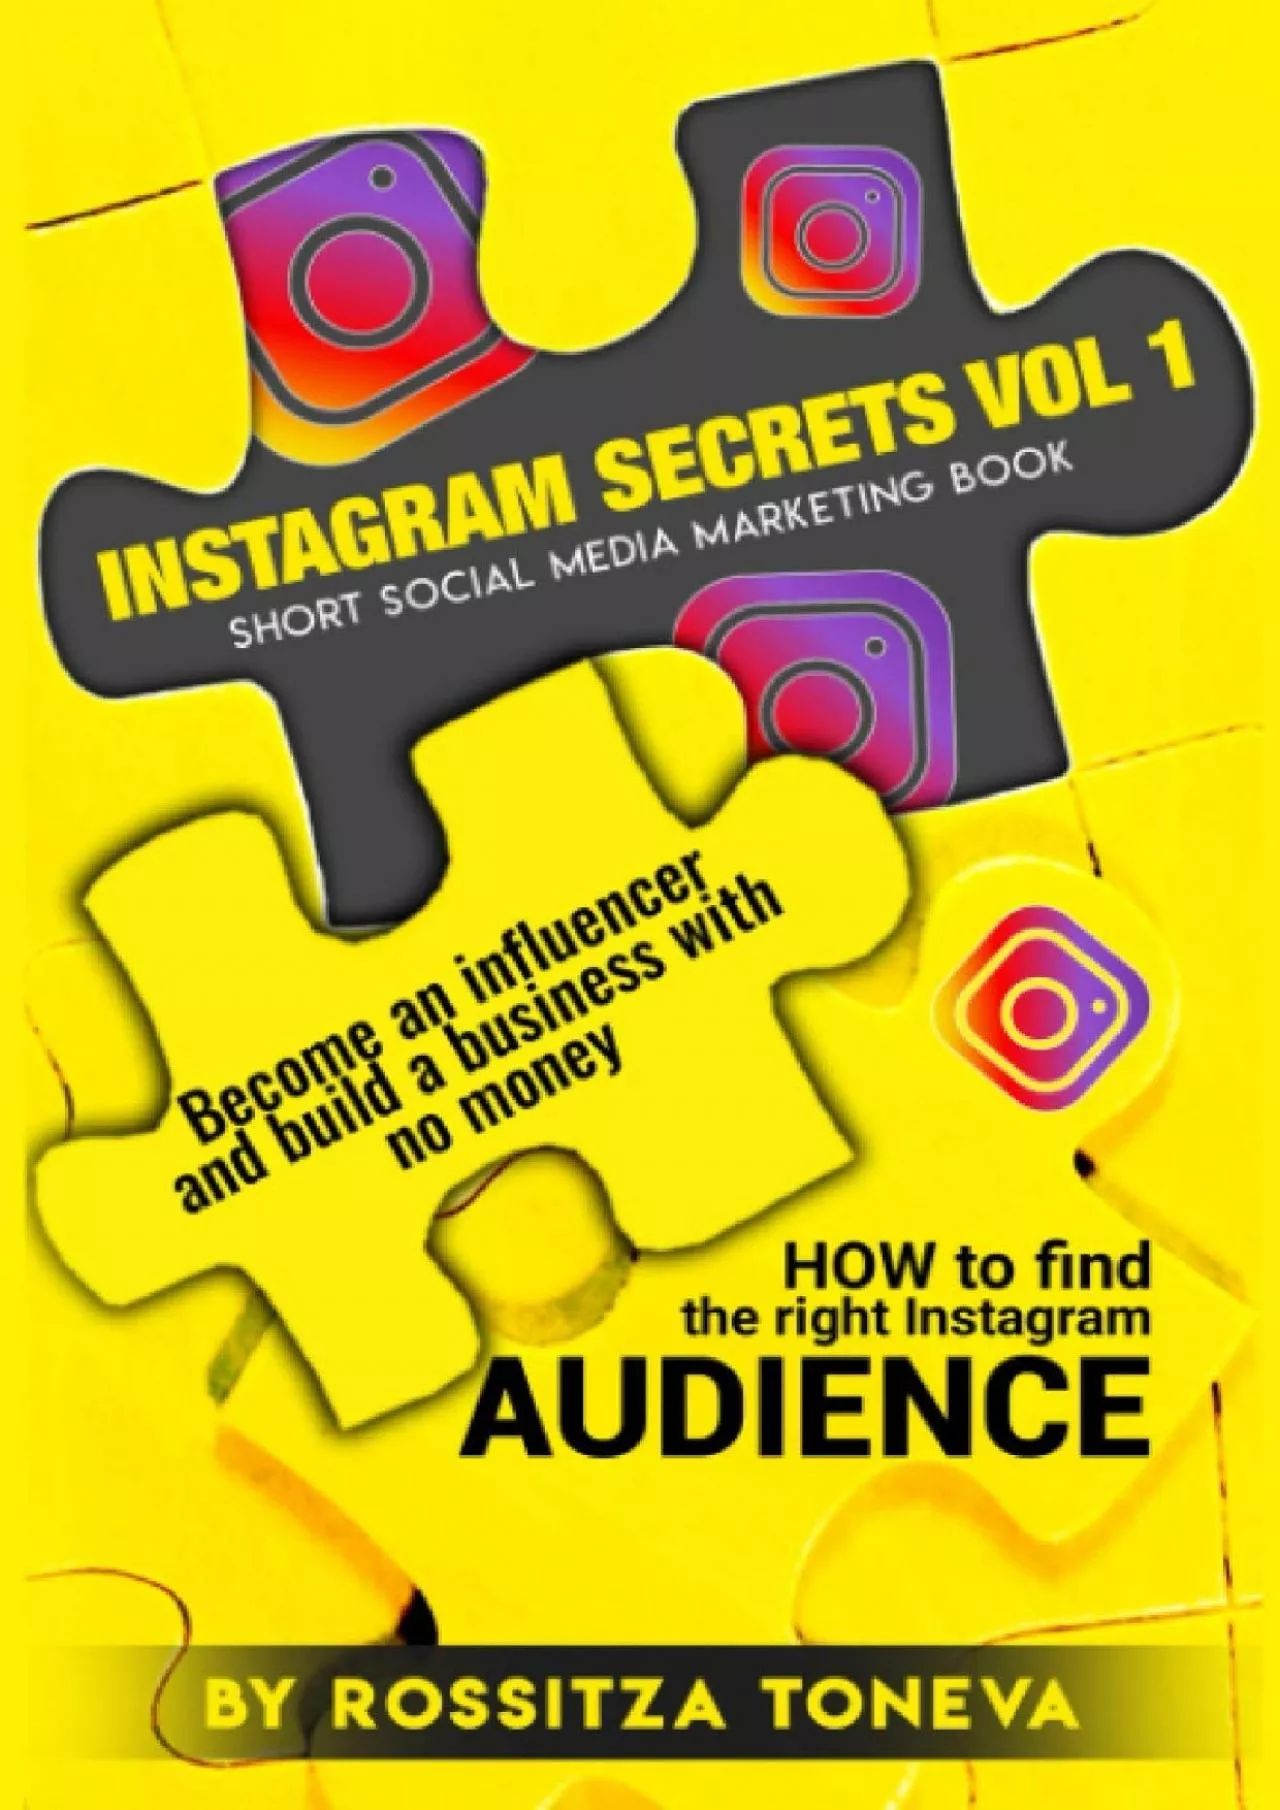 Instagram Secrets Vol 1: HOW to find the right Instagram AUDIENCE.: Become an influencer